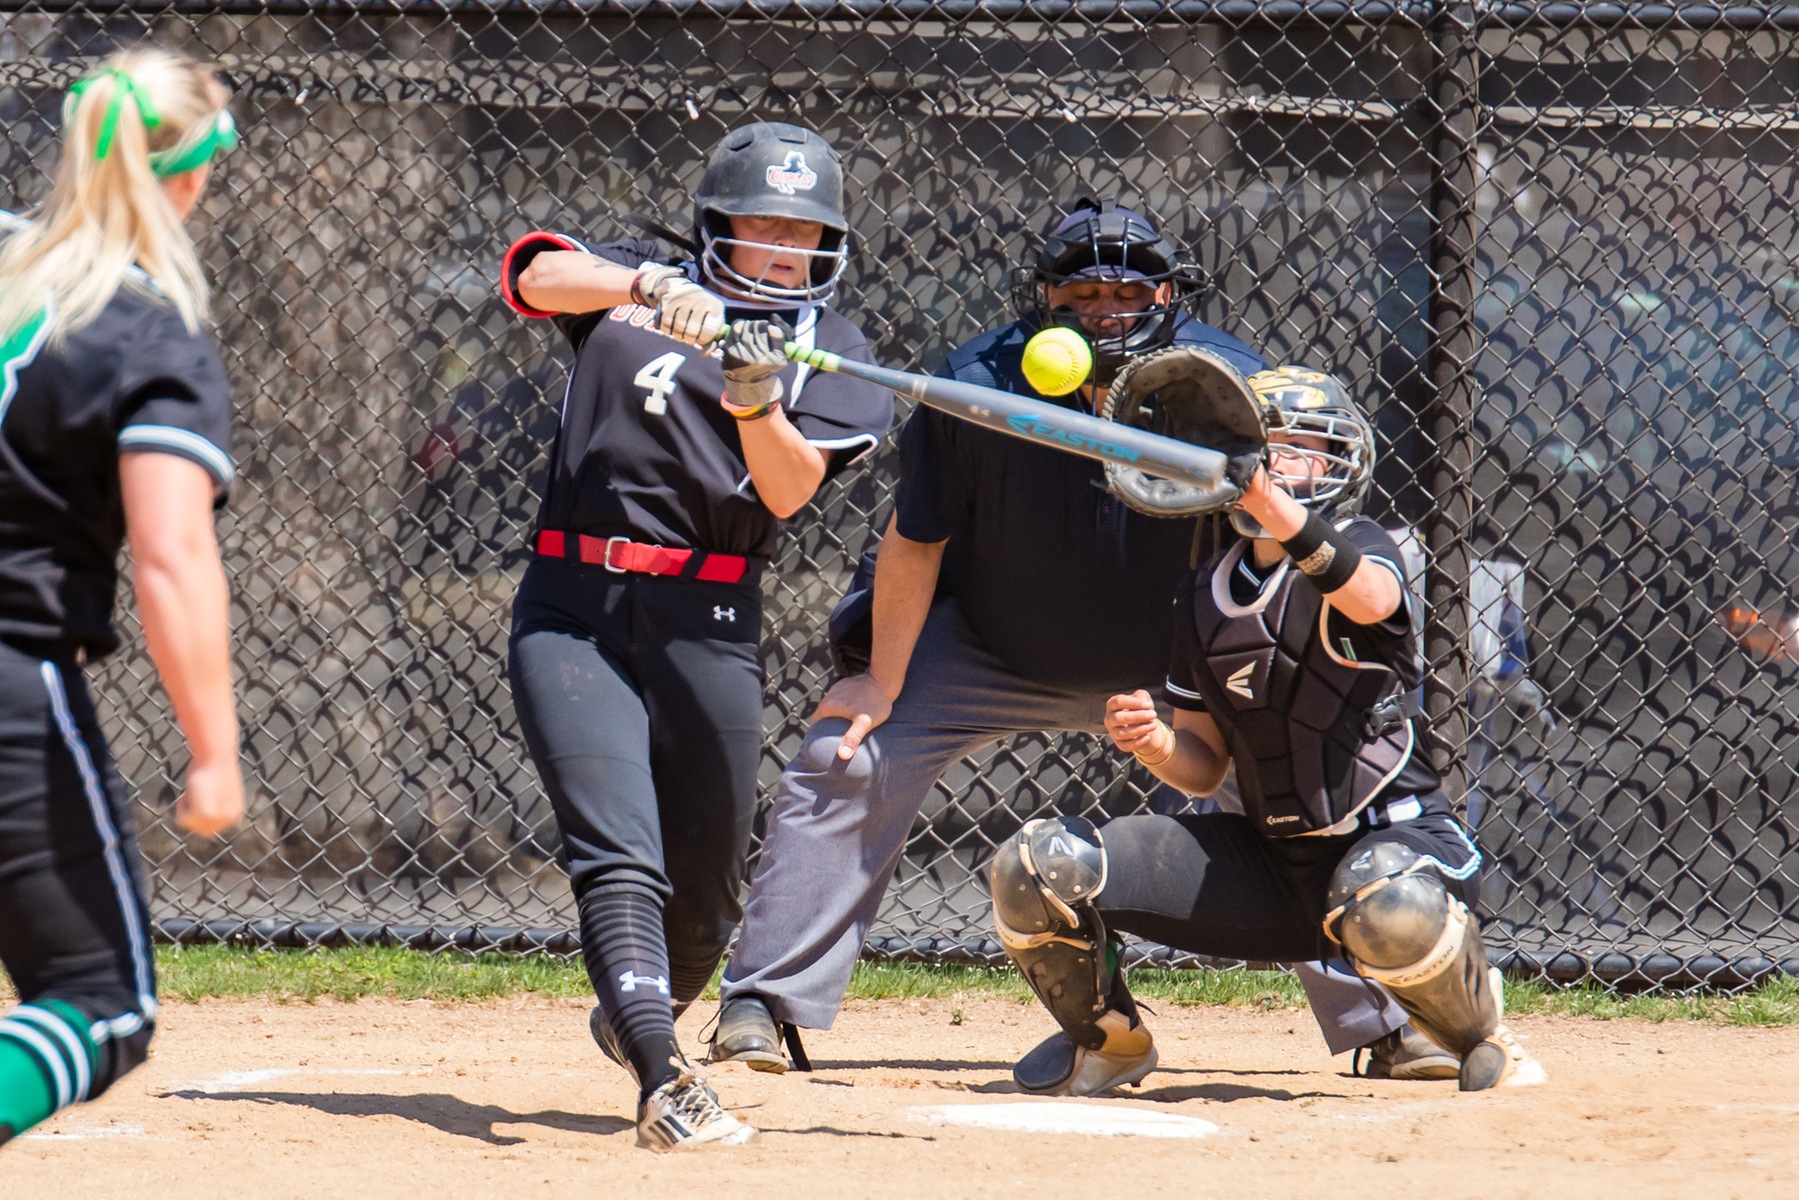 The Lady Charger softball team swept a CACC double-header from host Felician University